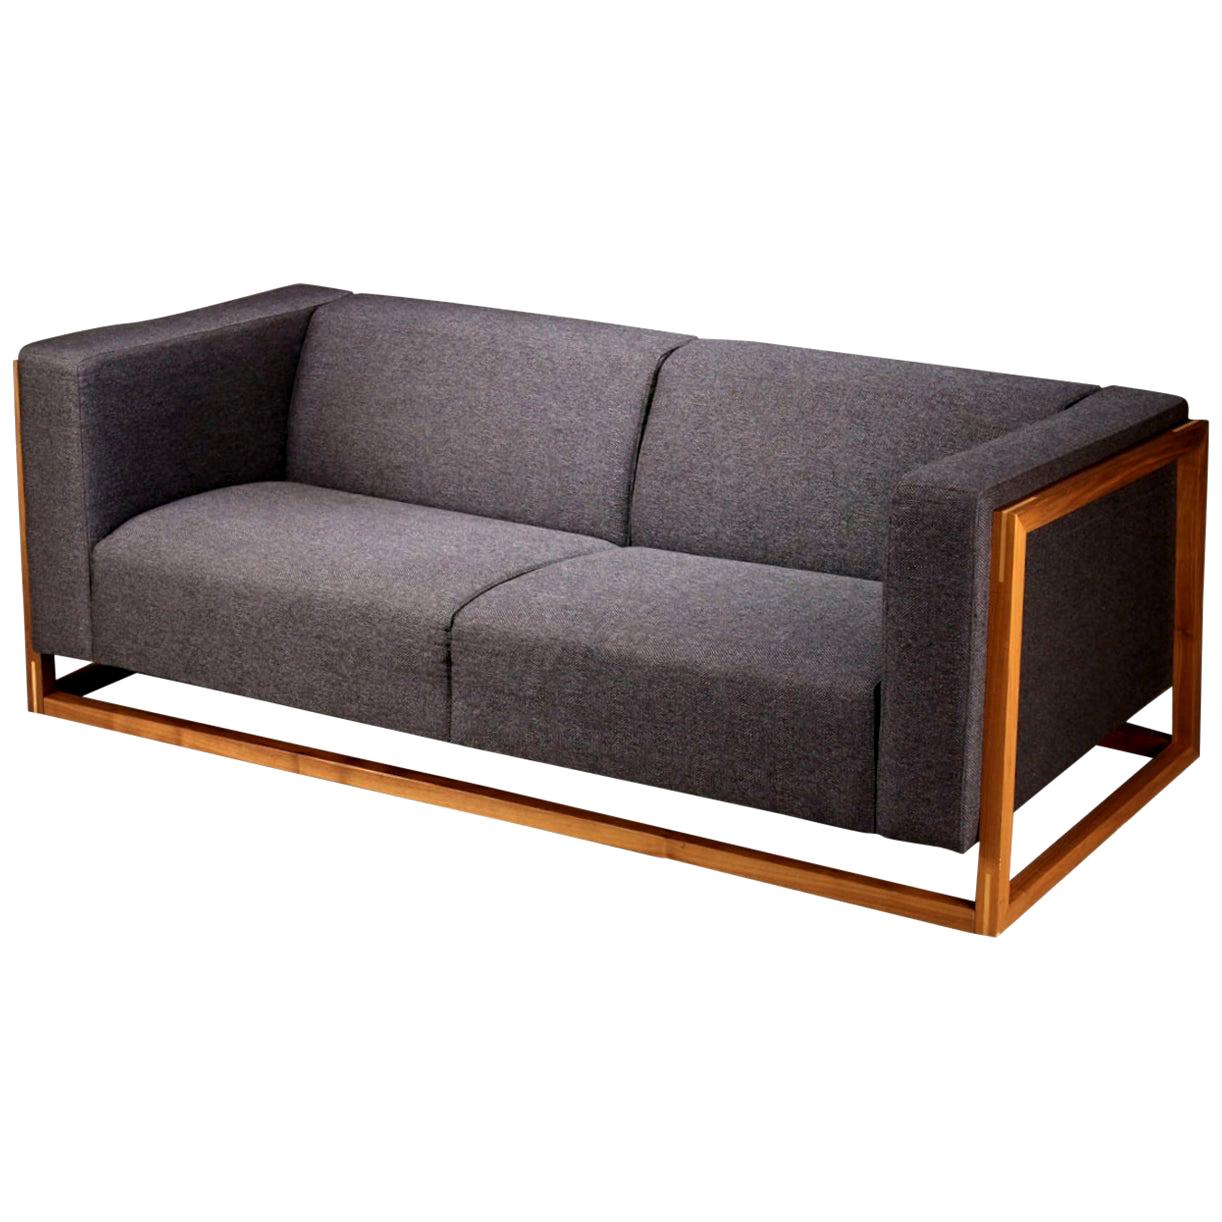 Three-Seat Sofa with Solid Walnut Frame and Grey Upholstery